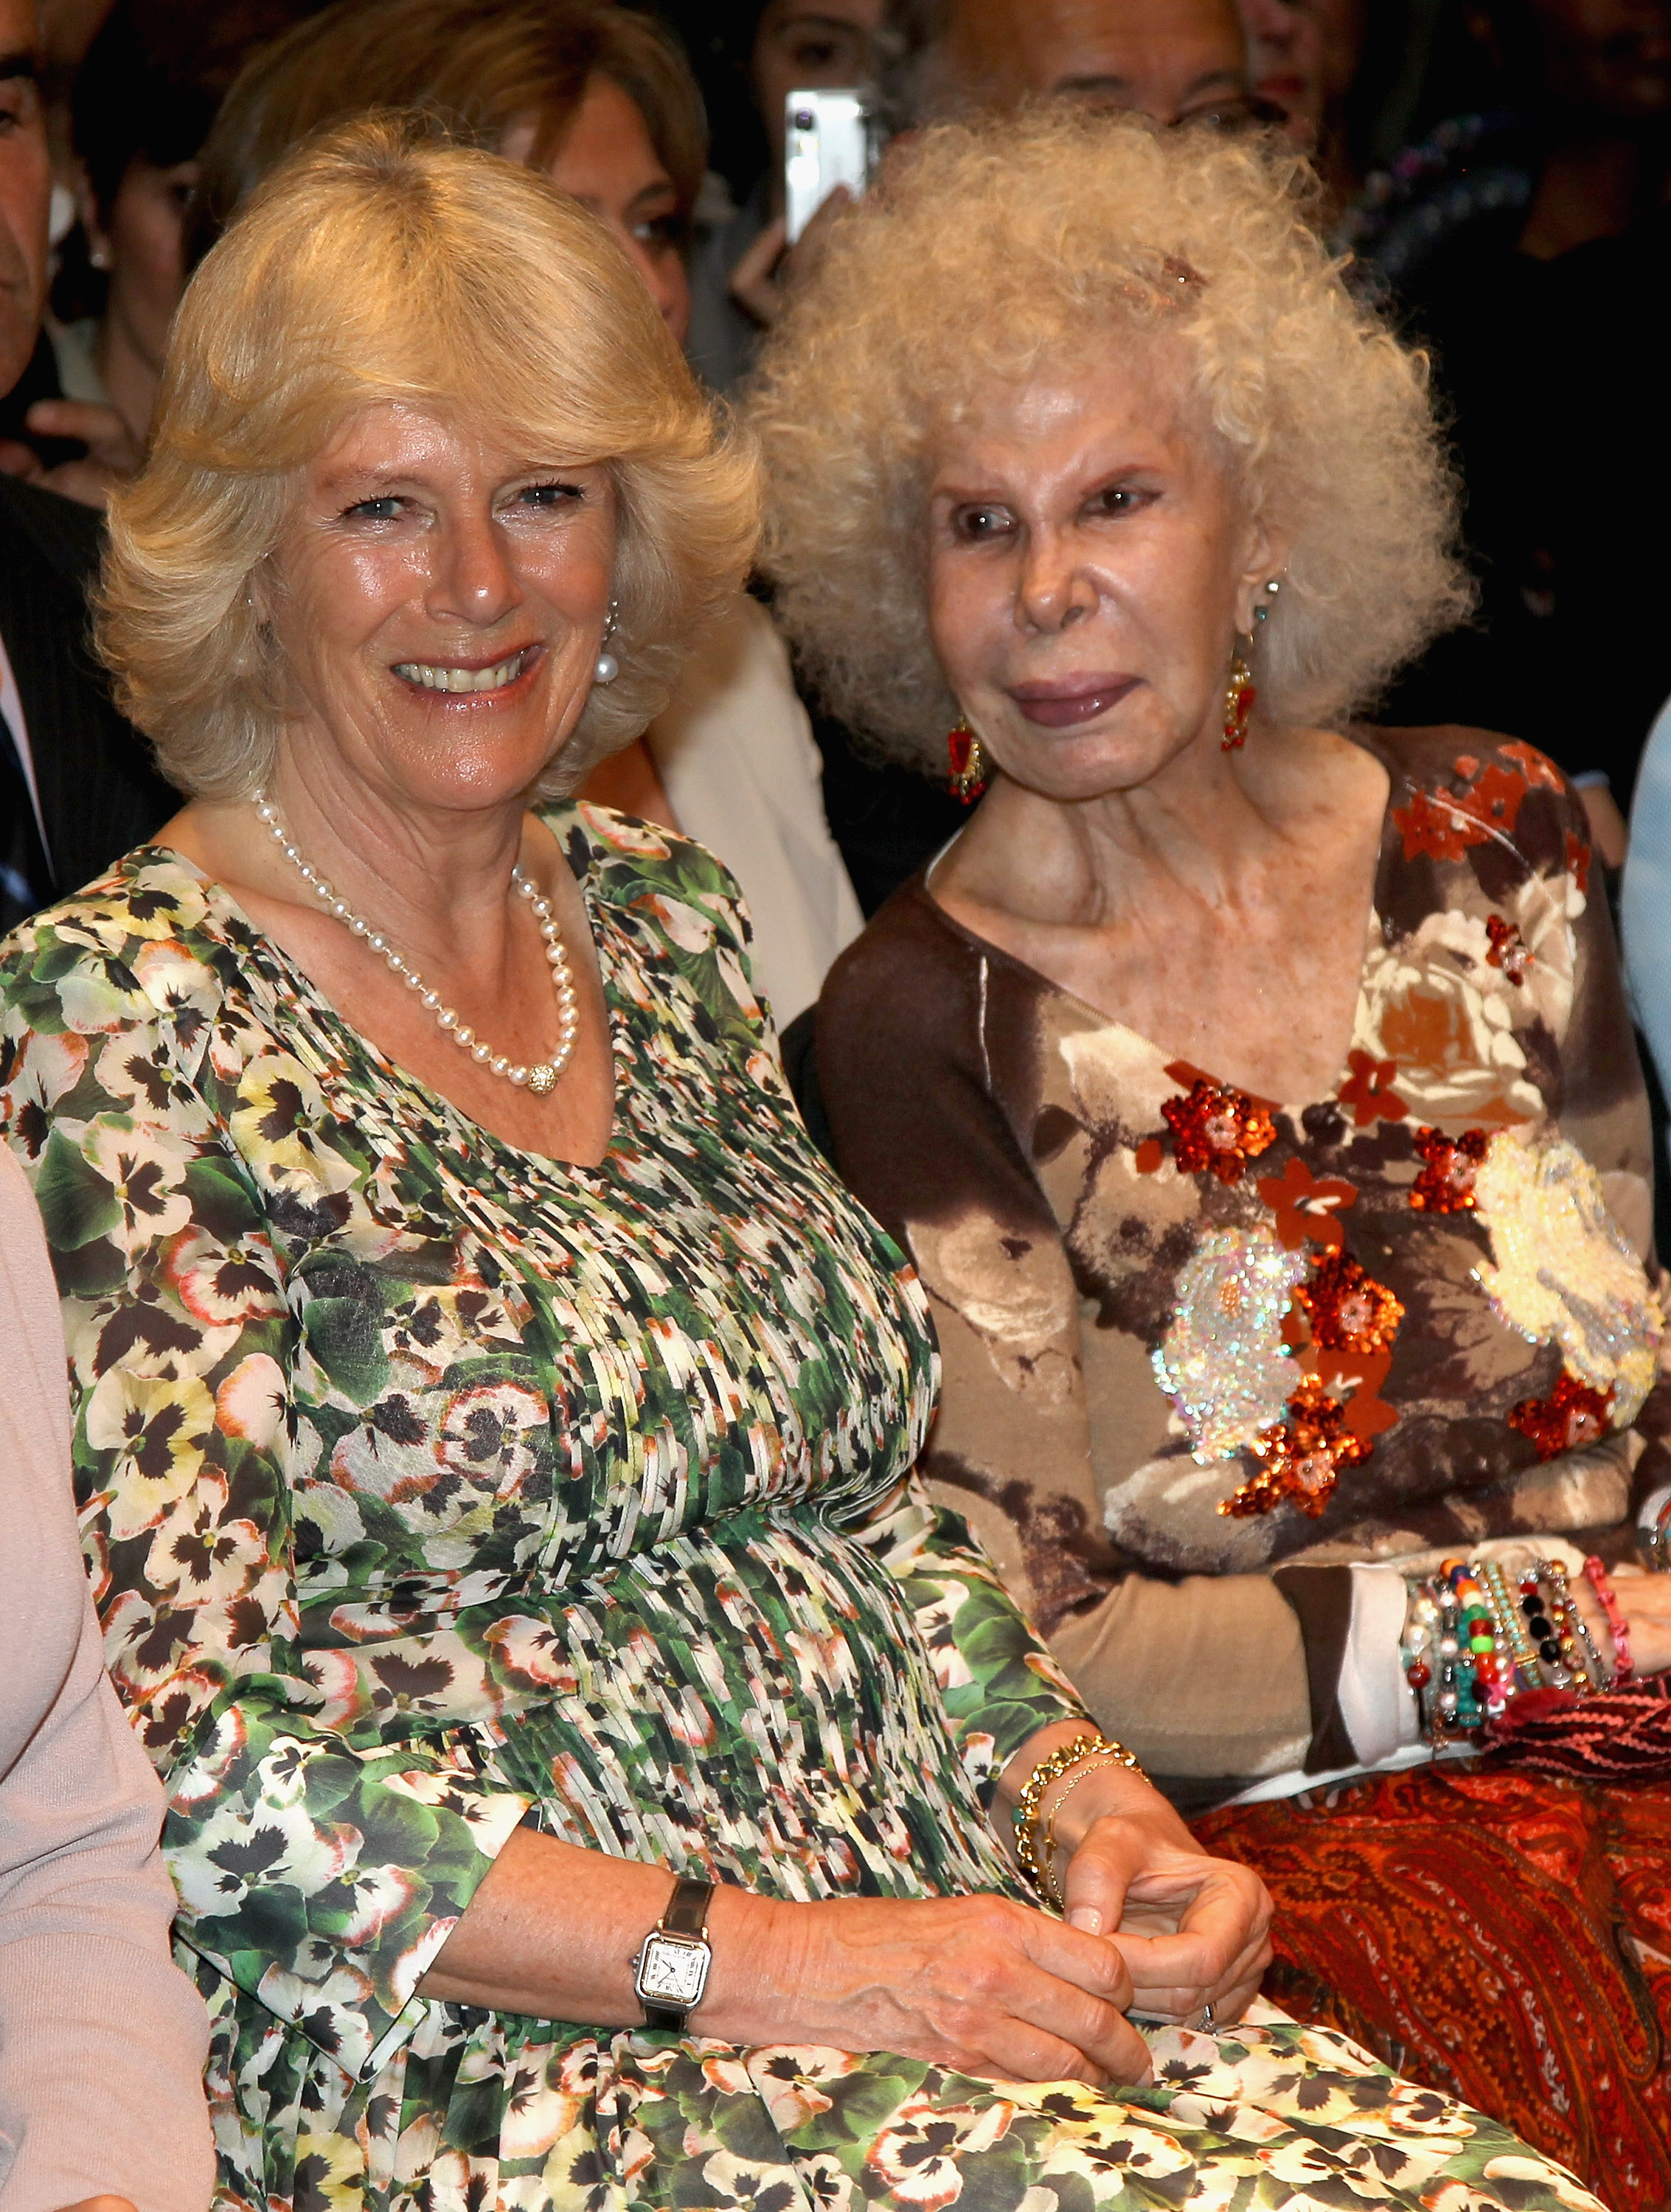 Queen Camilla Parker Bowls and the Duchess of Alba, Maria del Rosario Cayetana Fitz-James Stuart at the Flamenco Museum in Madrid, Spain on April 1, 2011 | Source: Getty Images